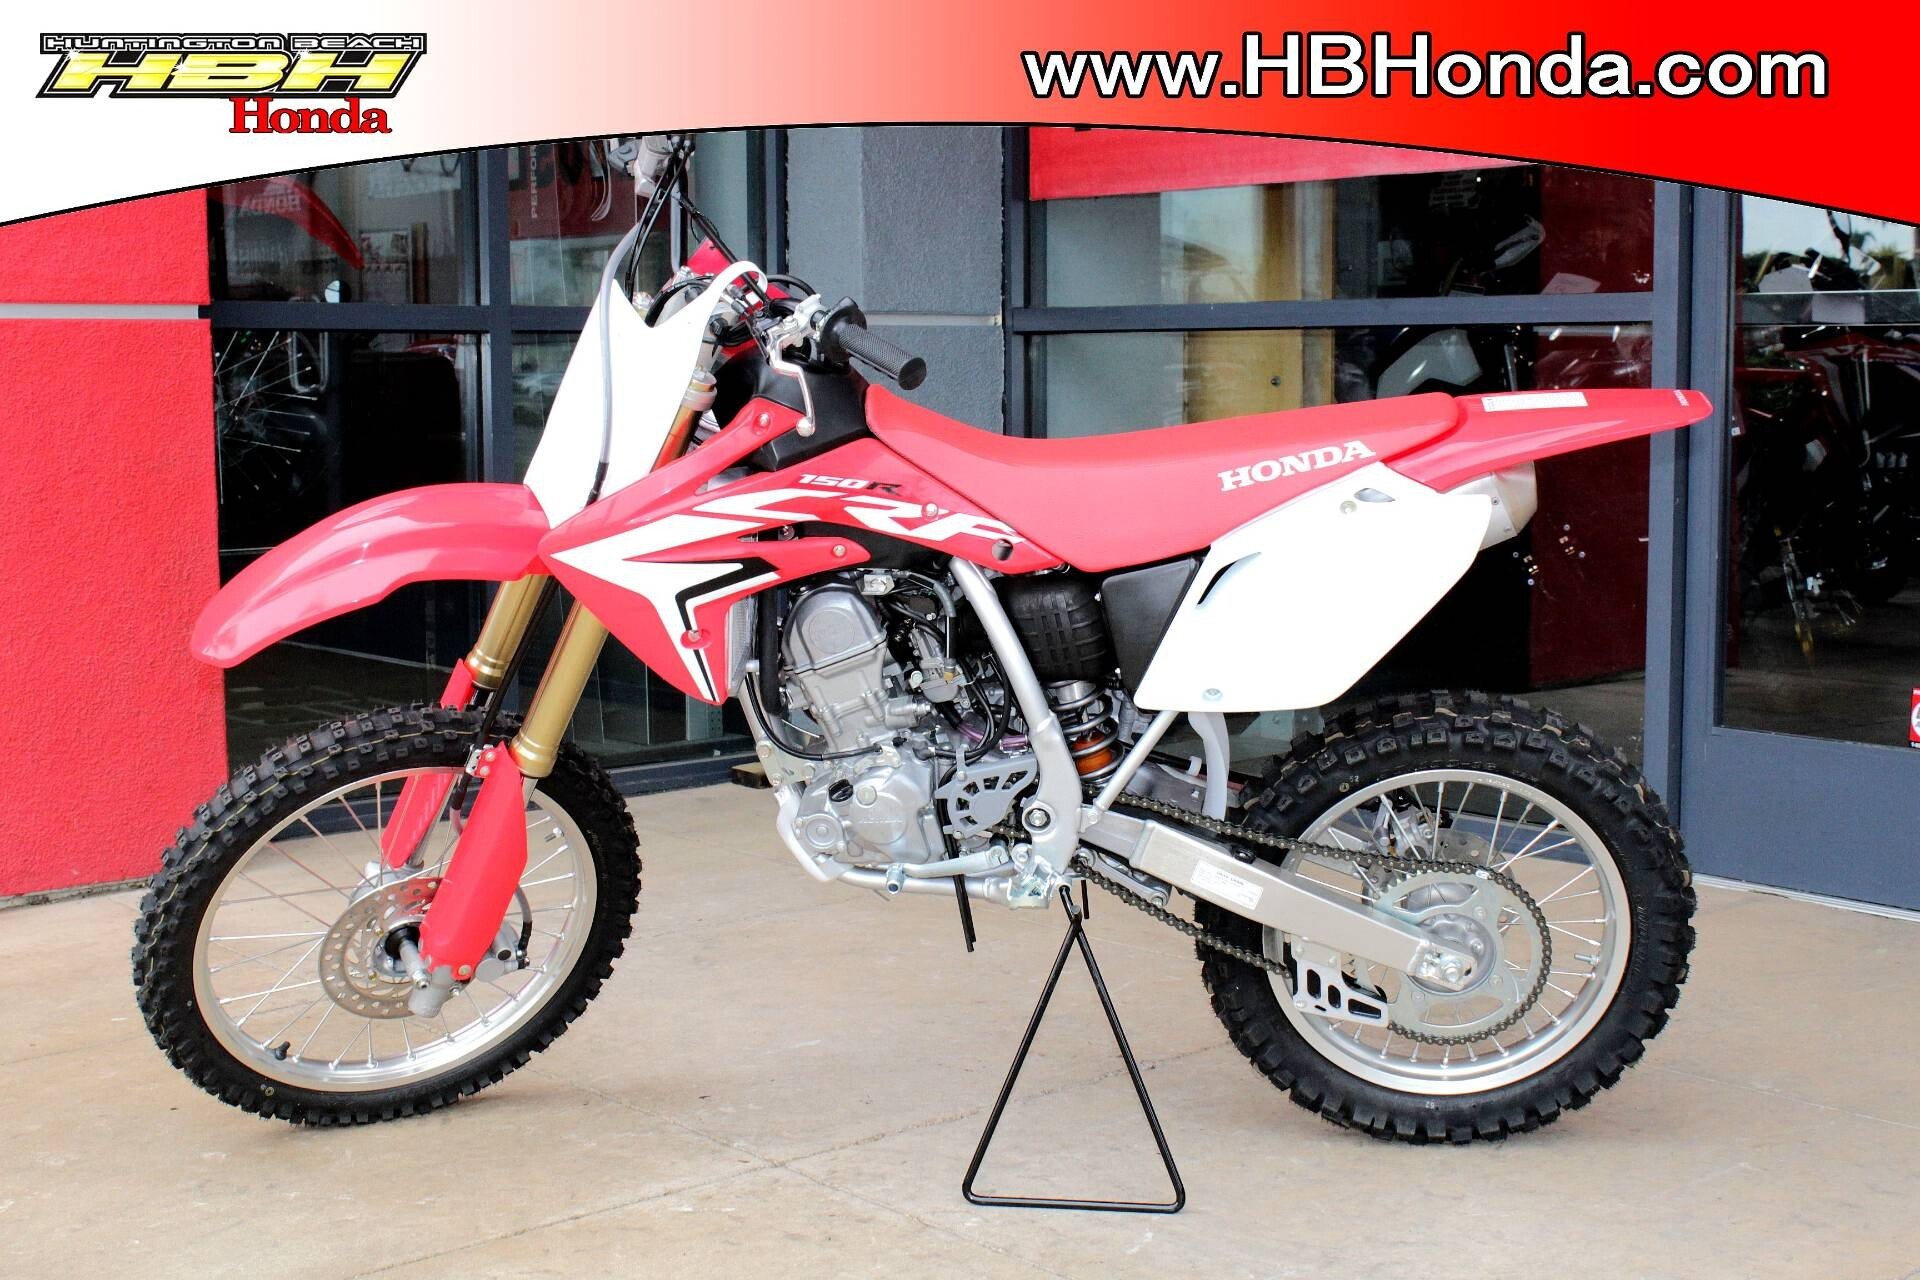 Honda CRF150R Motorcycles for Sale - Motorcycles on Autotrader